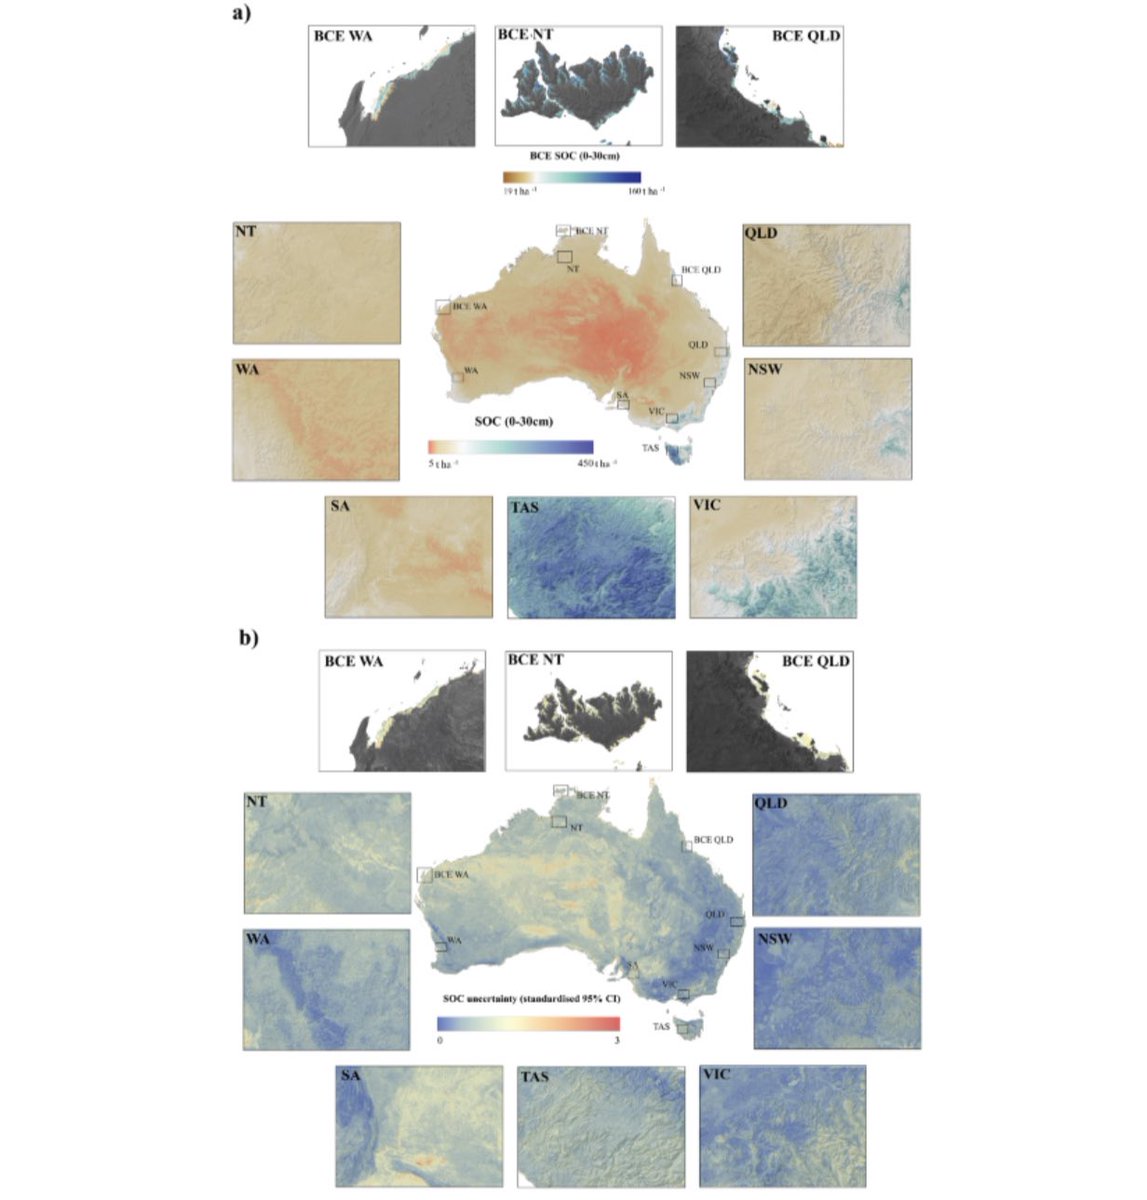 Great new paper led by @lewis__walden on predictive mapping of Australian soil carbon (terrestrial and coastal). Check it out here: protect-au.mimecast.com/s/vwKFCGv0q2FG… #BlueCarbon #Carbon #CarbonStocks